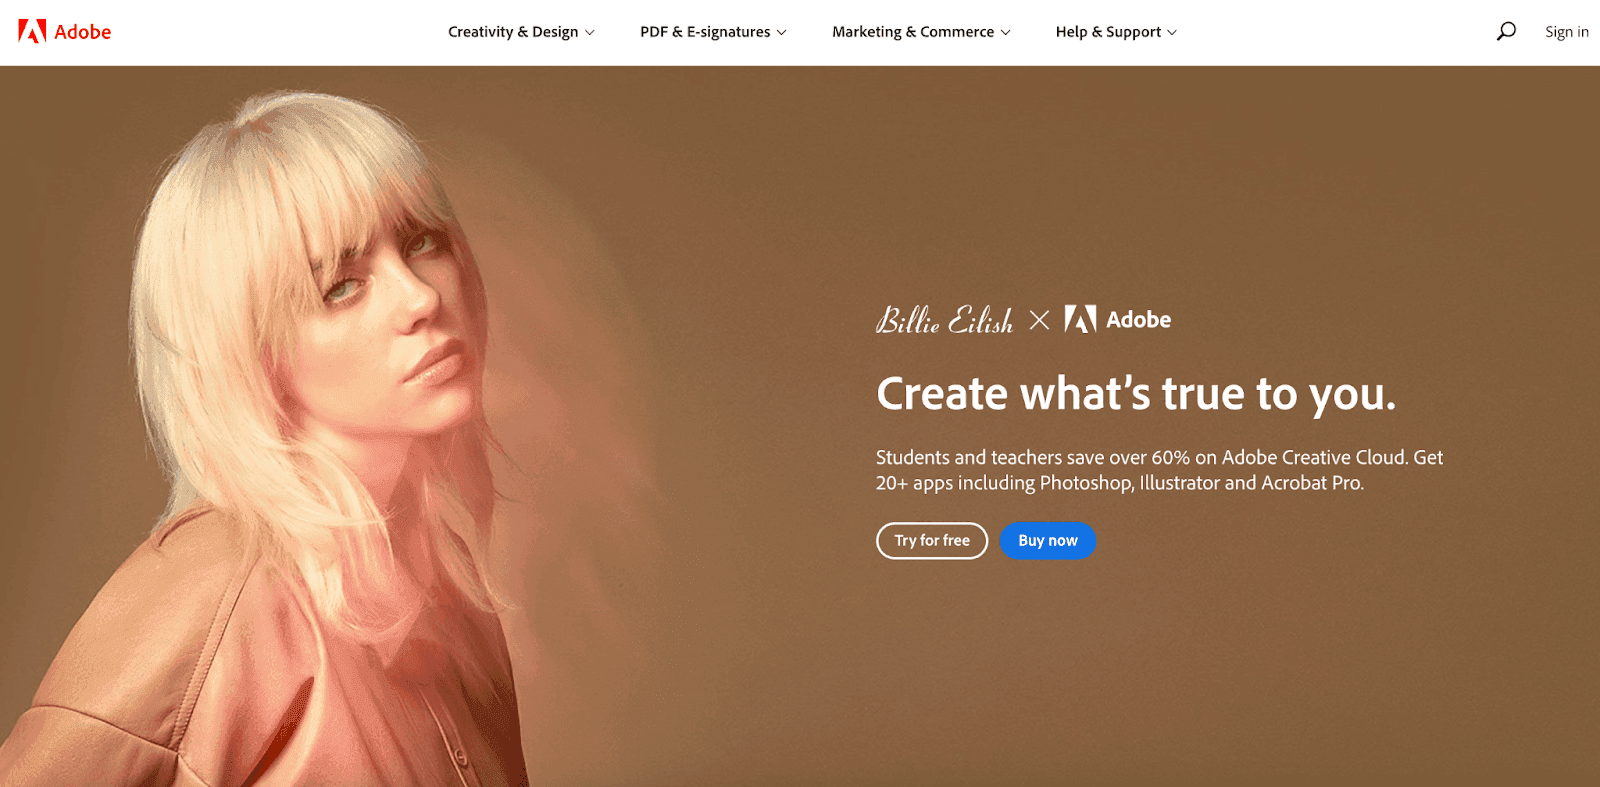 Adobe homepage of their website, but in English and advertising Billie Eilish x Adobe 